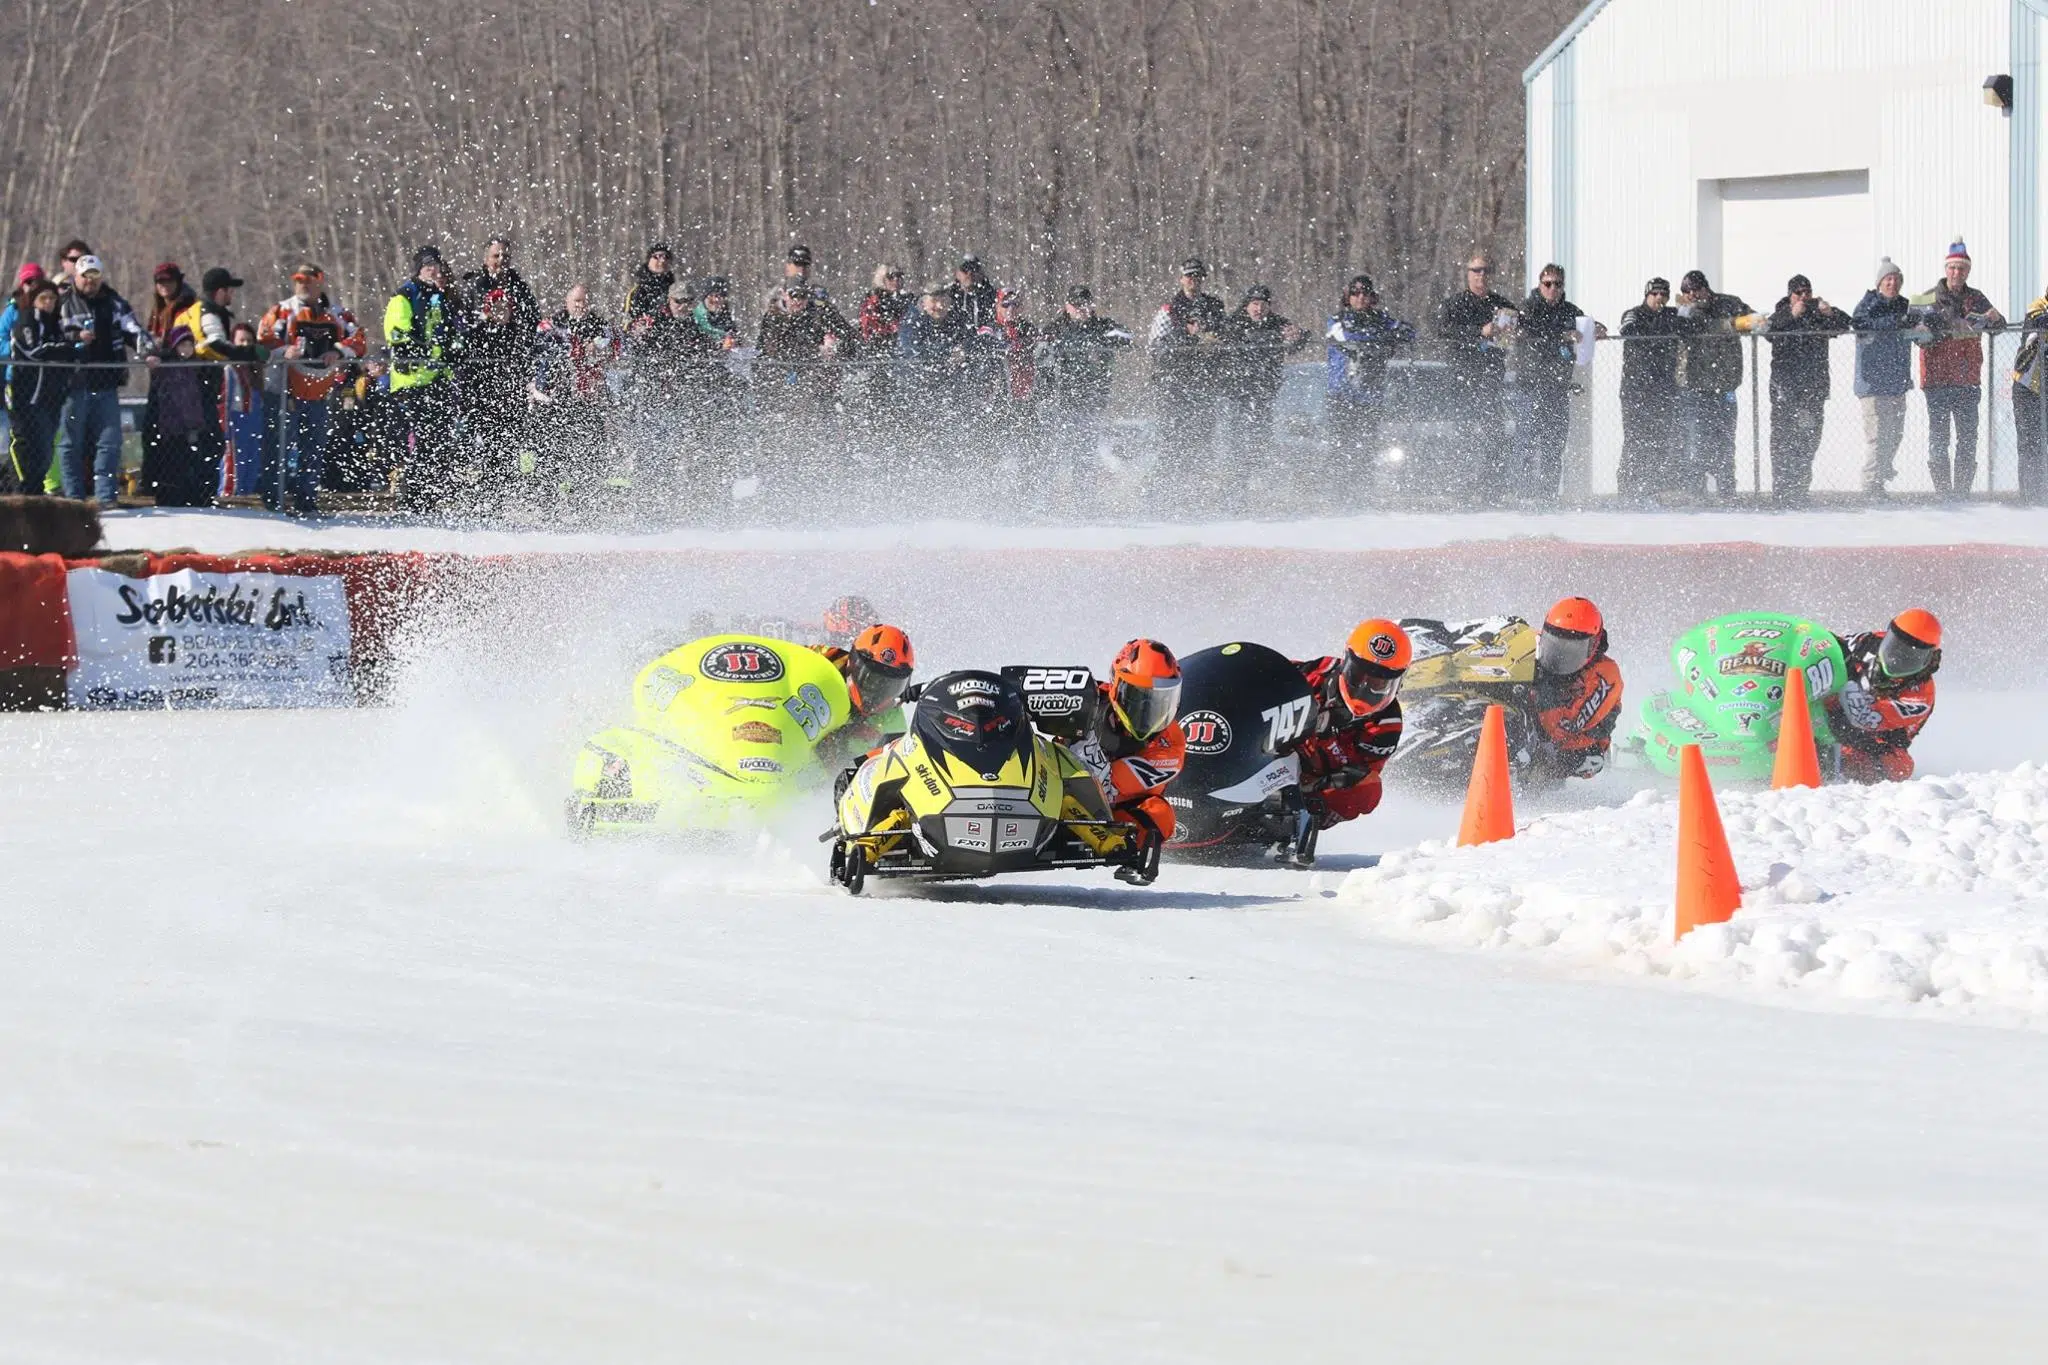 The Fastest Snowmobiles in the world are coming to BEAUSEJOUR!! QX104